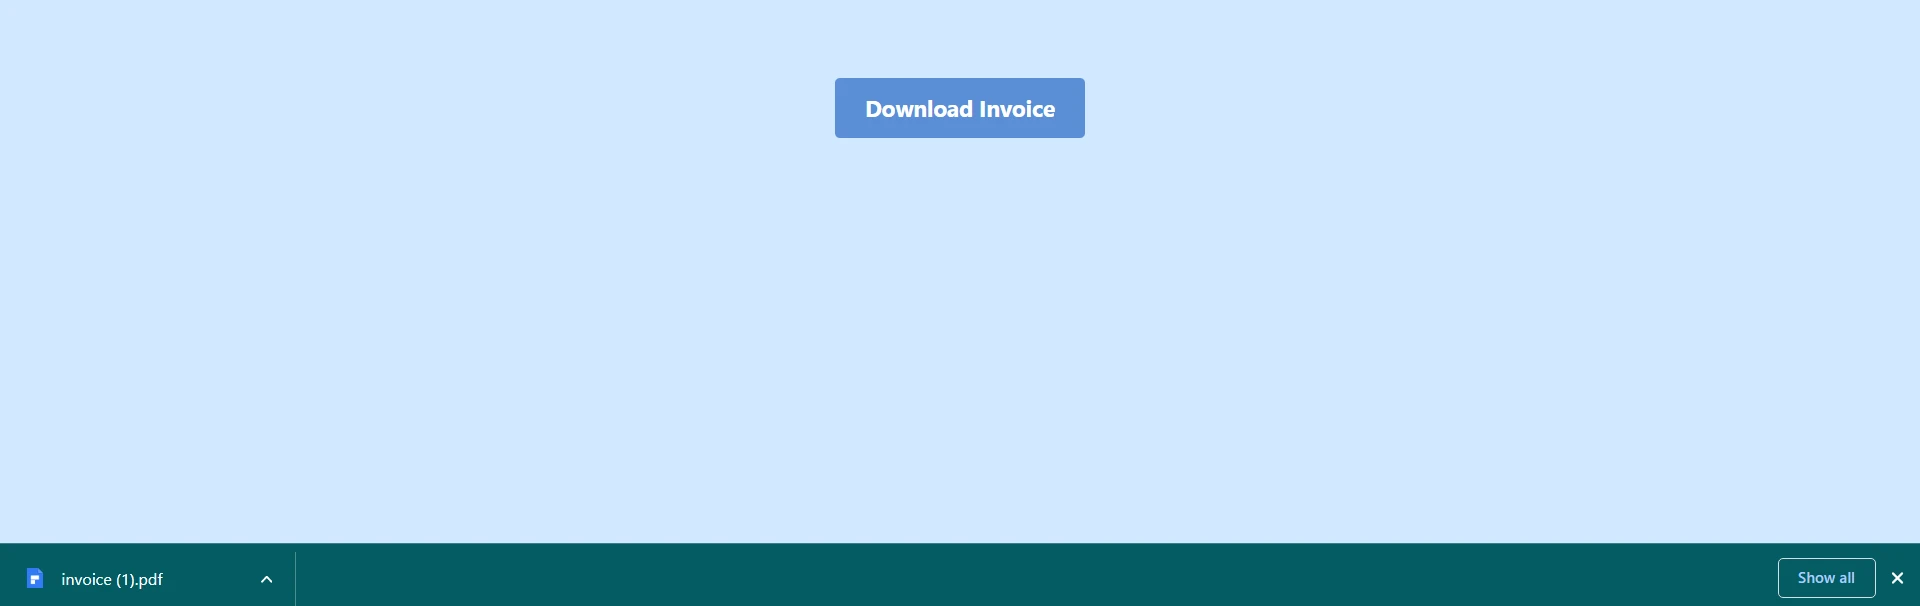 How to Convert HTML to PDF in React (Developer Tutorial): Figure 6 - Downloaded invoice